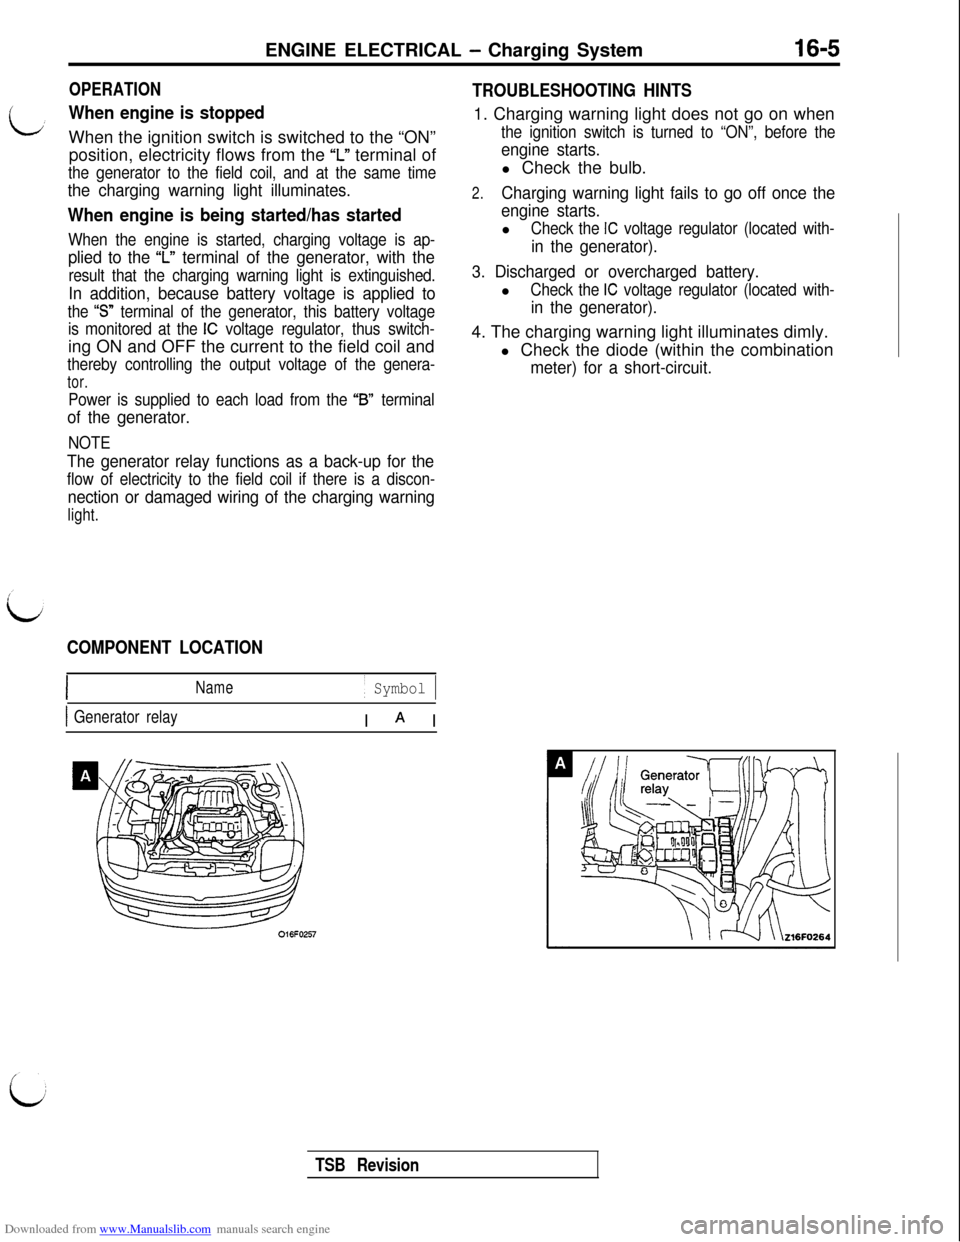 MITSUBISHI 3000GT 1993 2.G User Guide Downloaded from www.Manualslib.com manuals search engine ENGINE ELECTRICAL - Charging System16-5
OPERATION
When engine is stoppedWhen the ignition switch is switched to the “ON”
position, electric